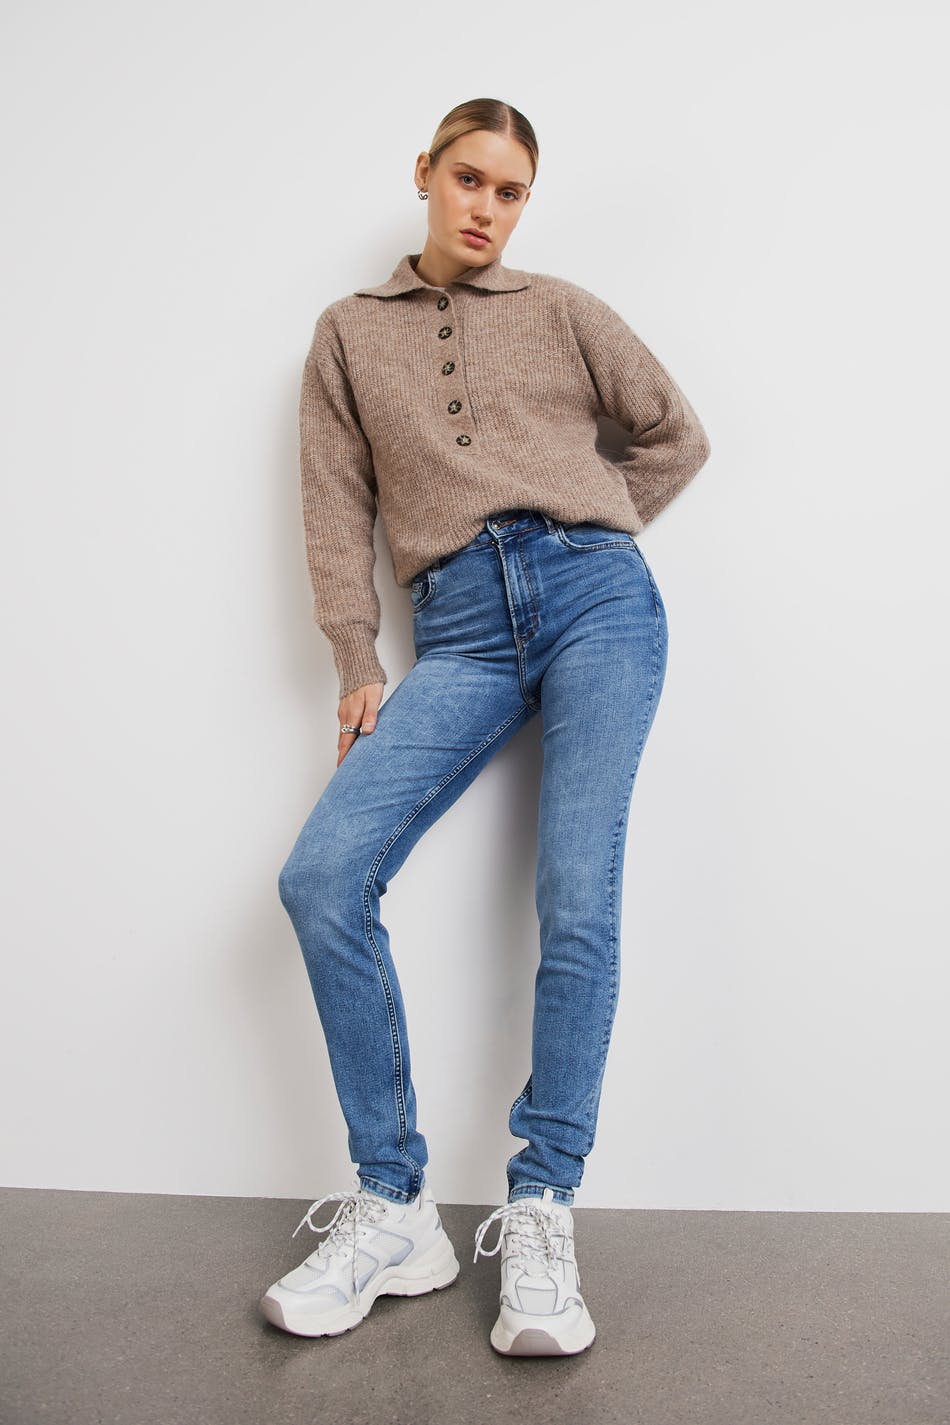 Gina Tricot - Comfy tall slim jeans